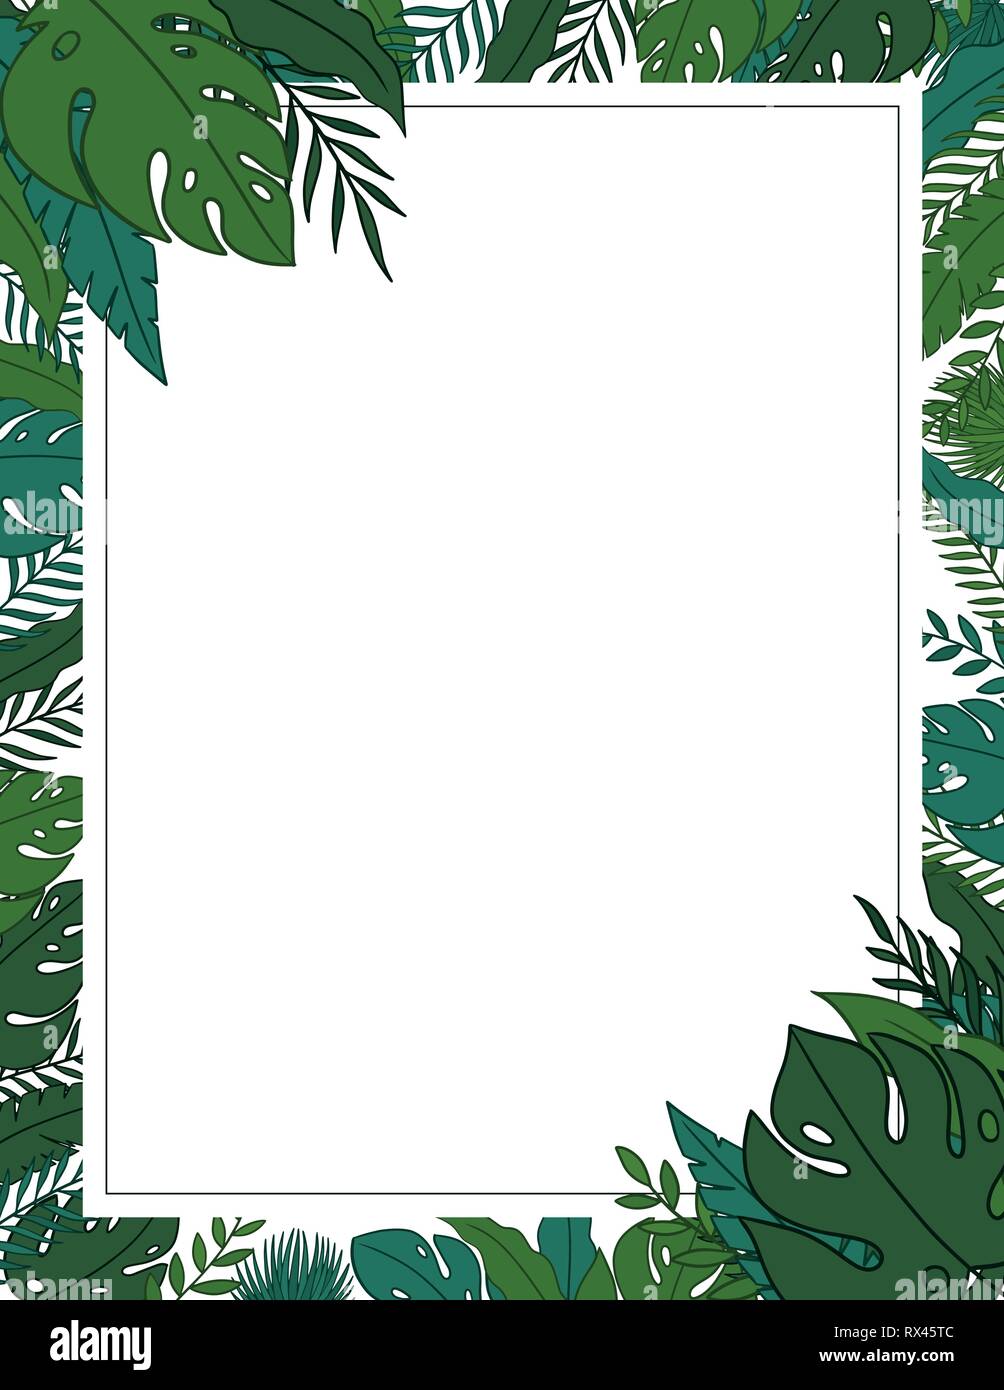 Tropical jungle leaves frame border with a blank space for a text, logo ...